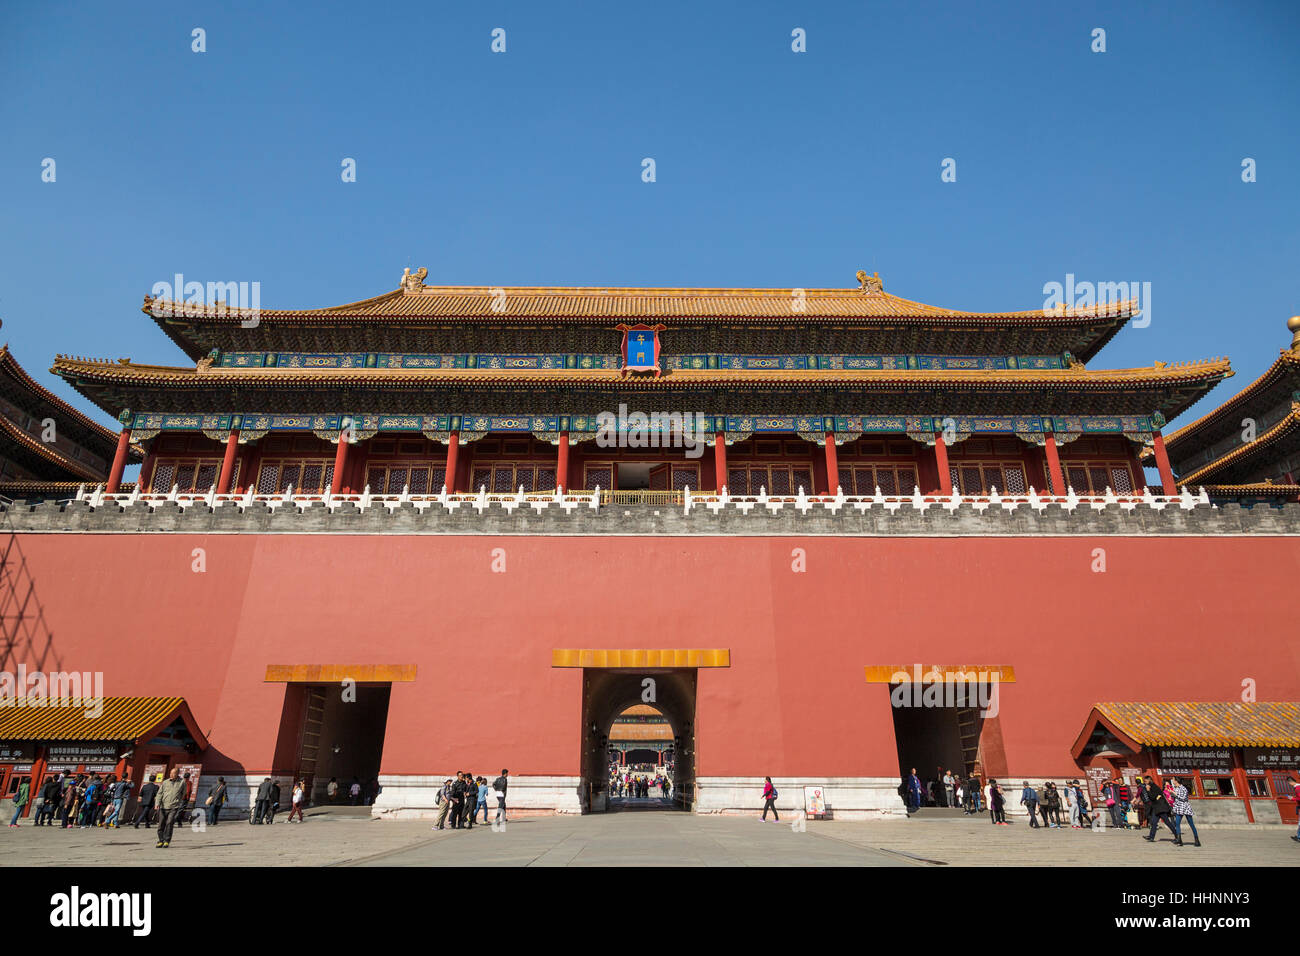 Meridian Gate of the Forbidden City, Beijing, China Stock Photo